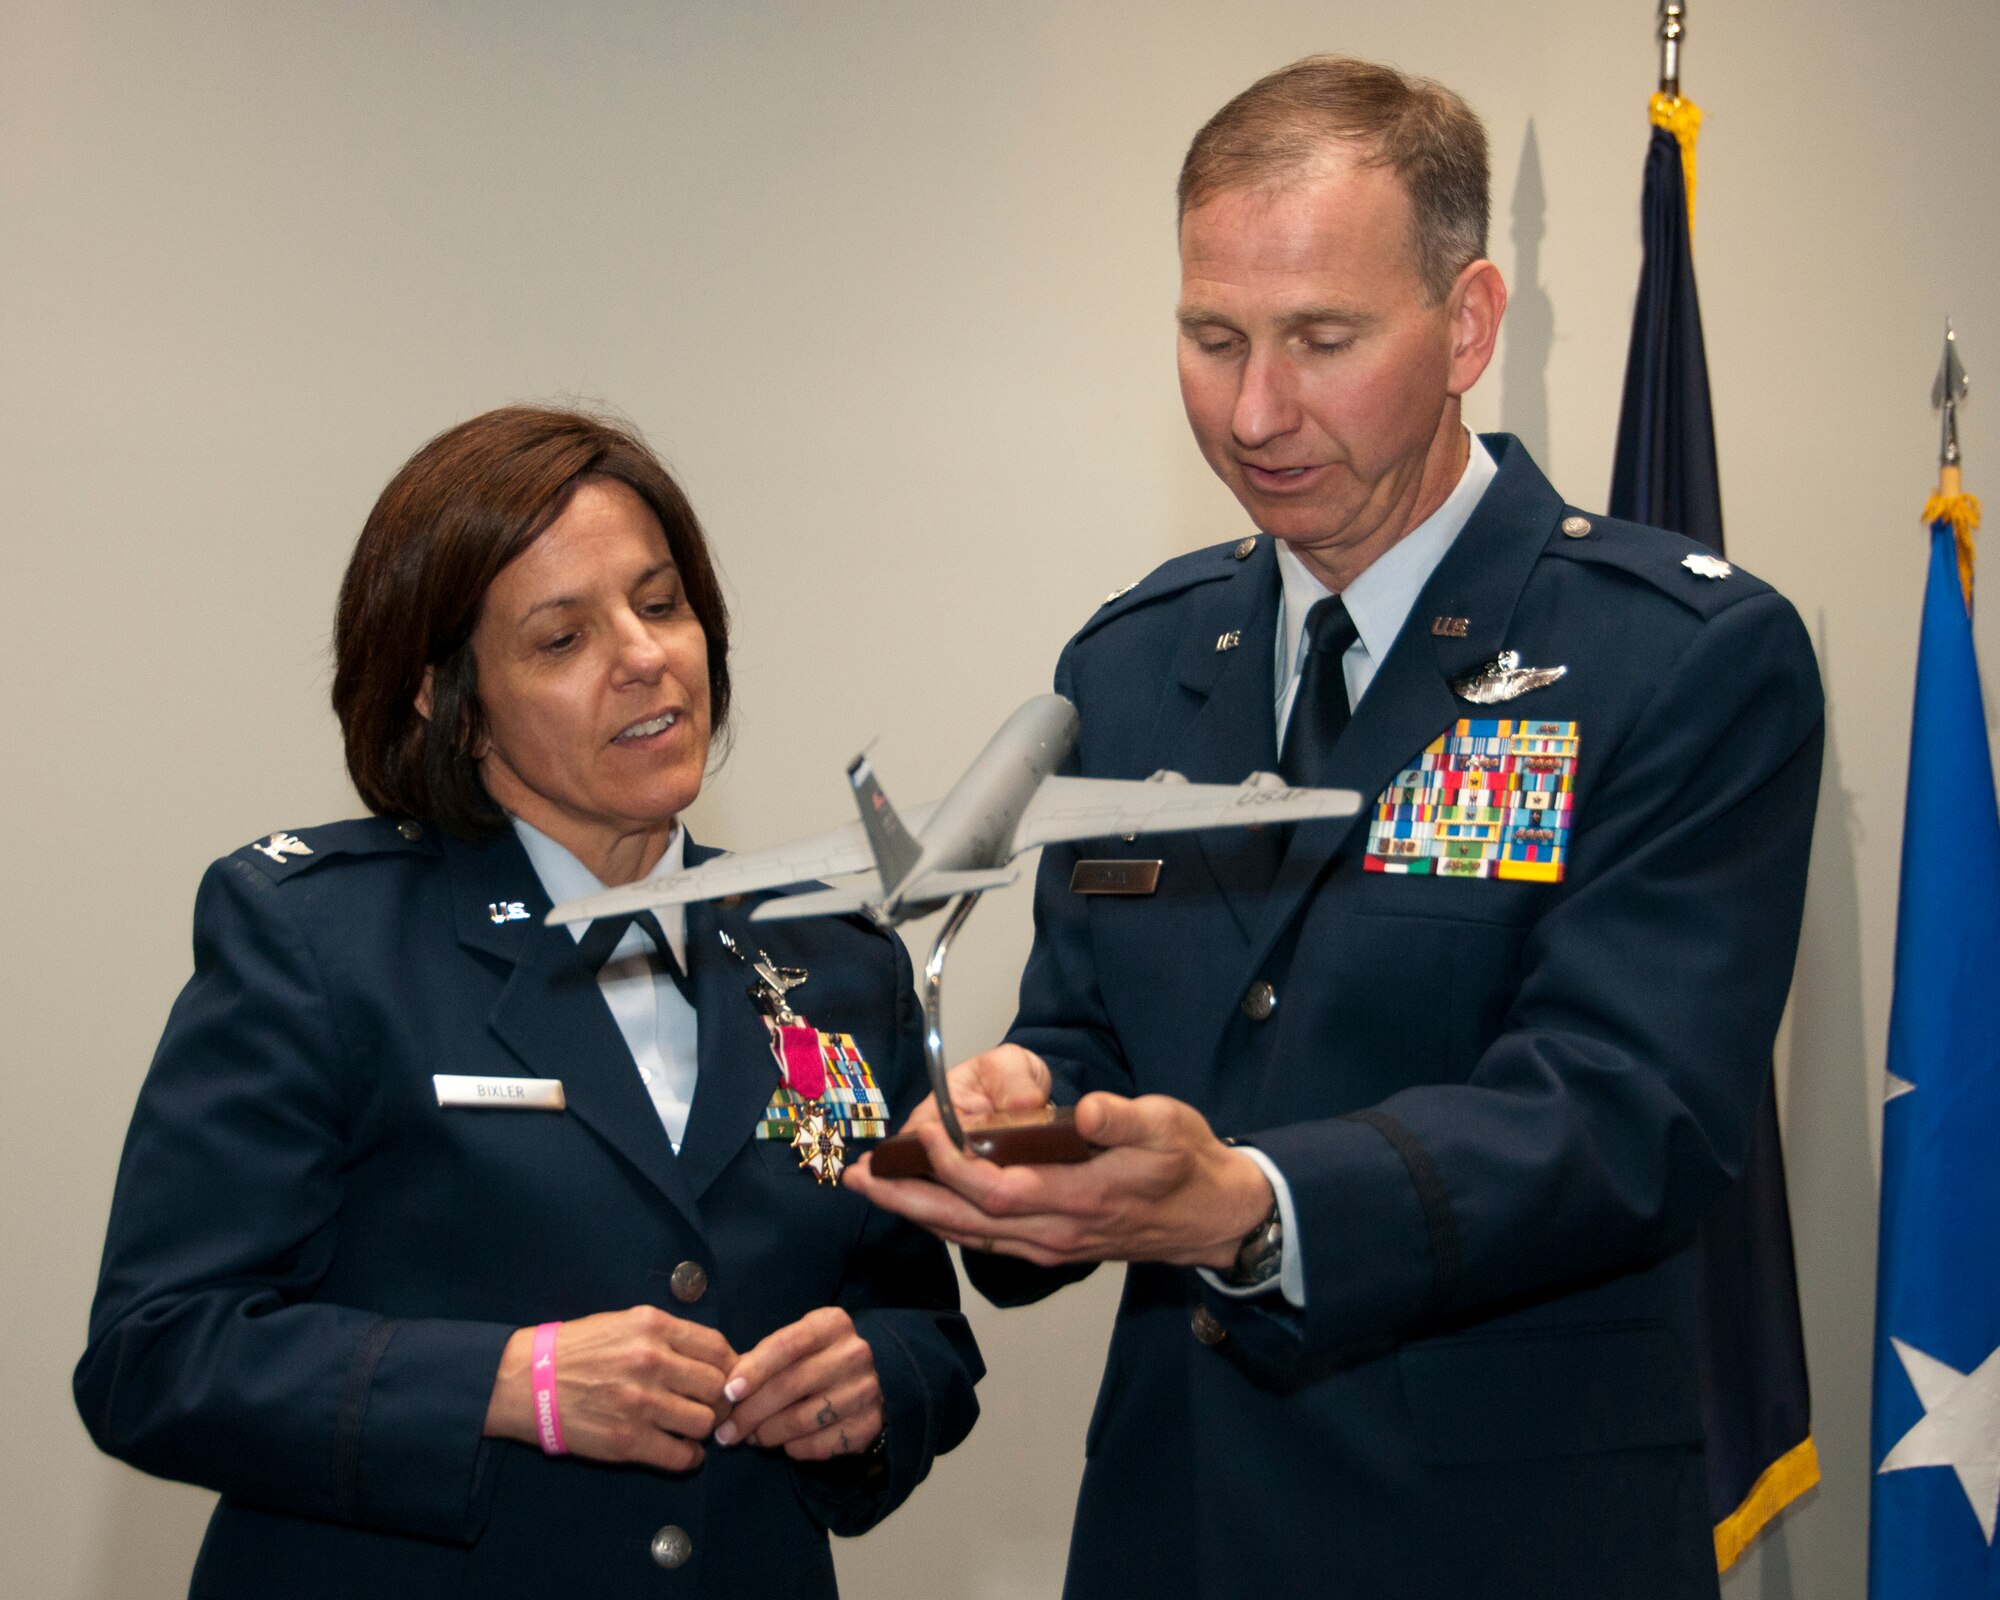 PEASE AIR NATIONAL GUARD BASE, N.H—Lt. Col. Jim Ryan presents Col. Nicole L. Desilets-Bixler  with a model KC-135 Stratotanker during her  during her retirement ceremony in building 264, on June 8, 2014. Bixler retires after 34 years of service and she has the distinction of being on the first N.H. Guard all-female flight crew which flew veterans to the Woman's memorial in Washington D.C. for its dedication. (U.S. Air National Guard photo by Staff Sgt. Curtis J. Lenz) 